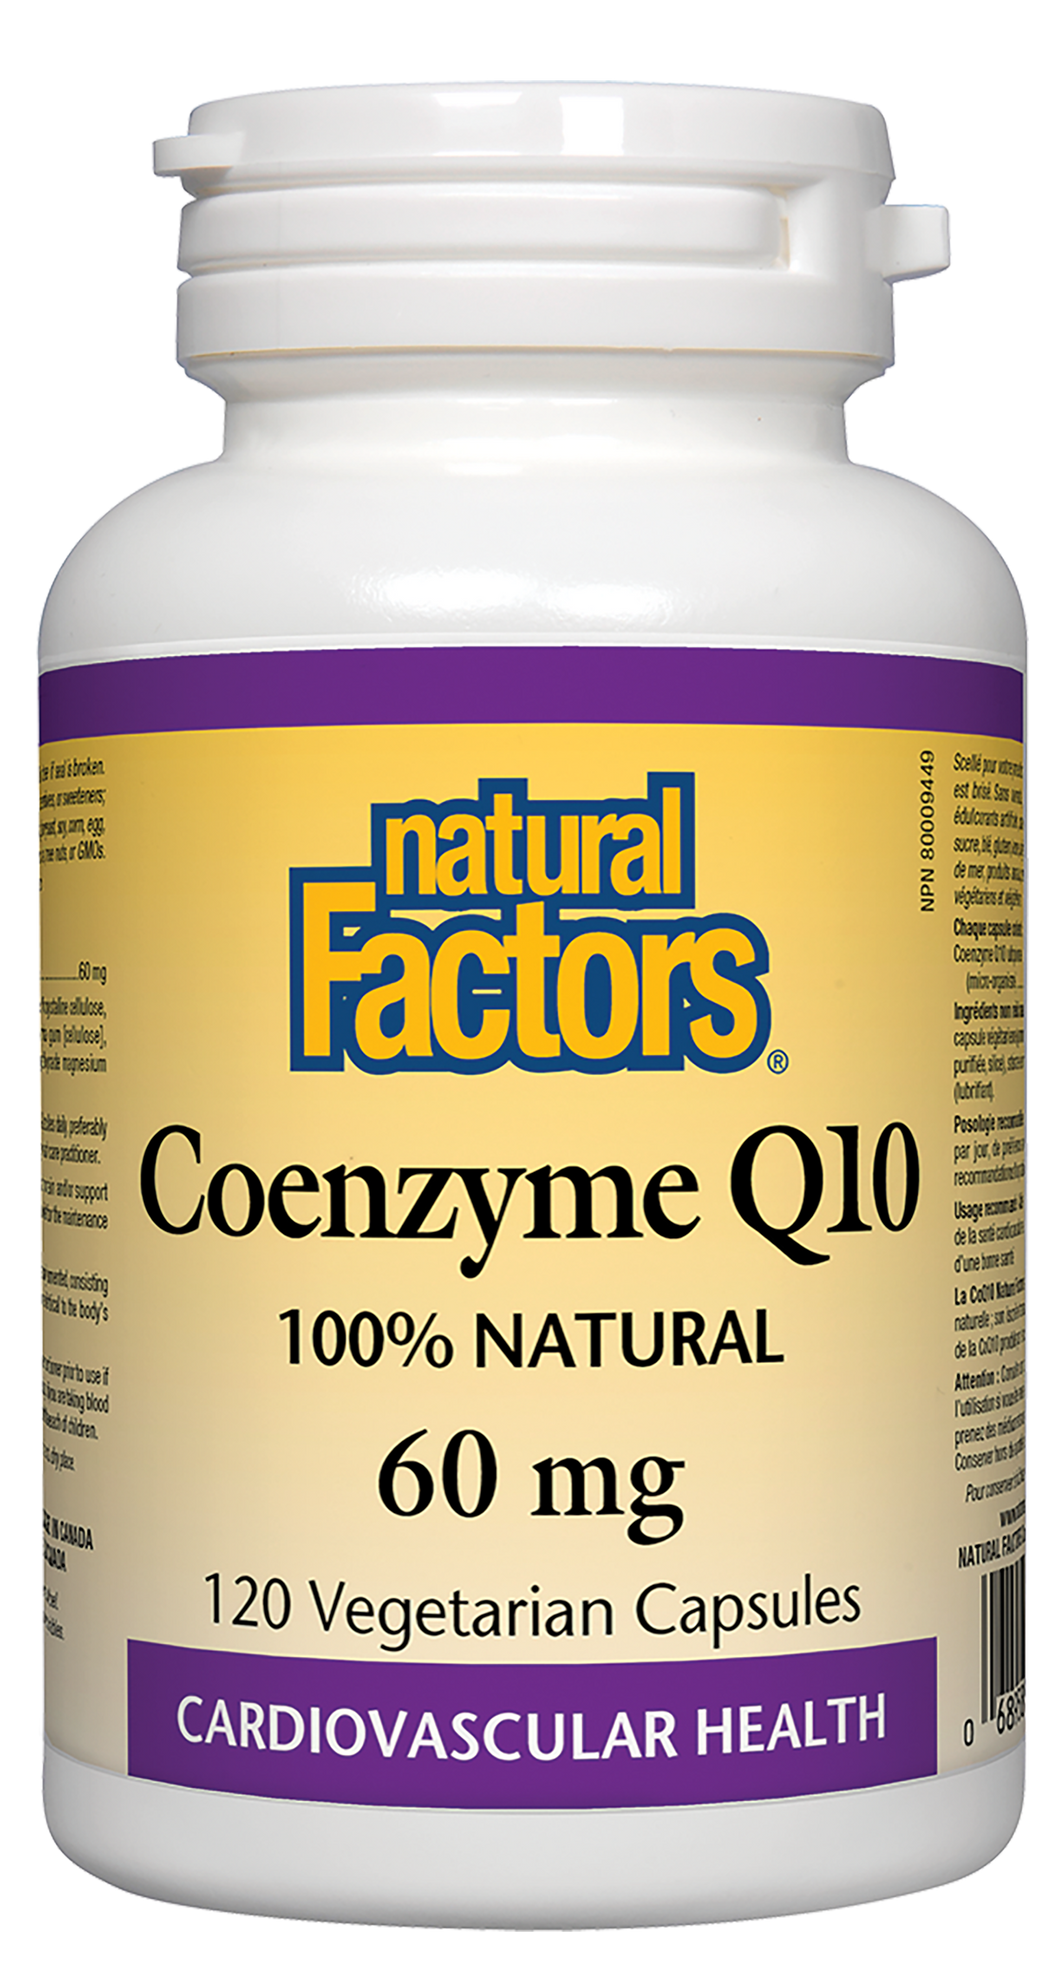 Coenzyme Q10 is a vitamin-like essential nutrient that helps increase levels of cellular energy production and is required by every cell in our body. Known to promote healthy heart function, Natural Factors Coenzyme Q10 is naturally fermented, consisting only of the natural trans isomer identical to the body’s own CoQ10. 